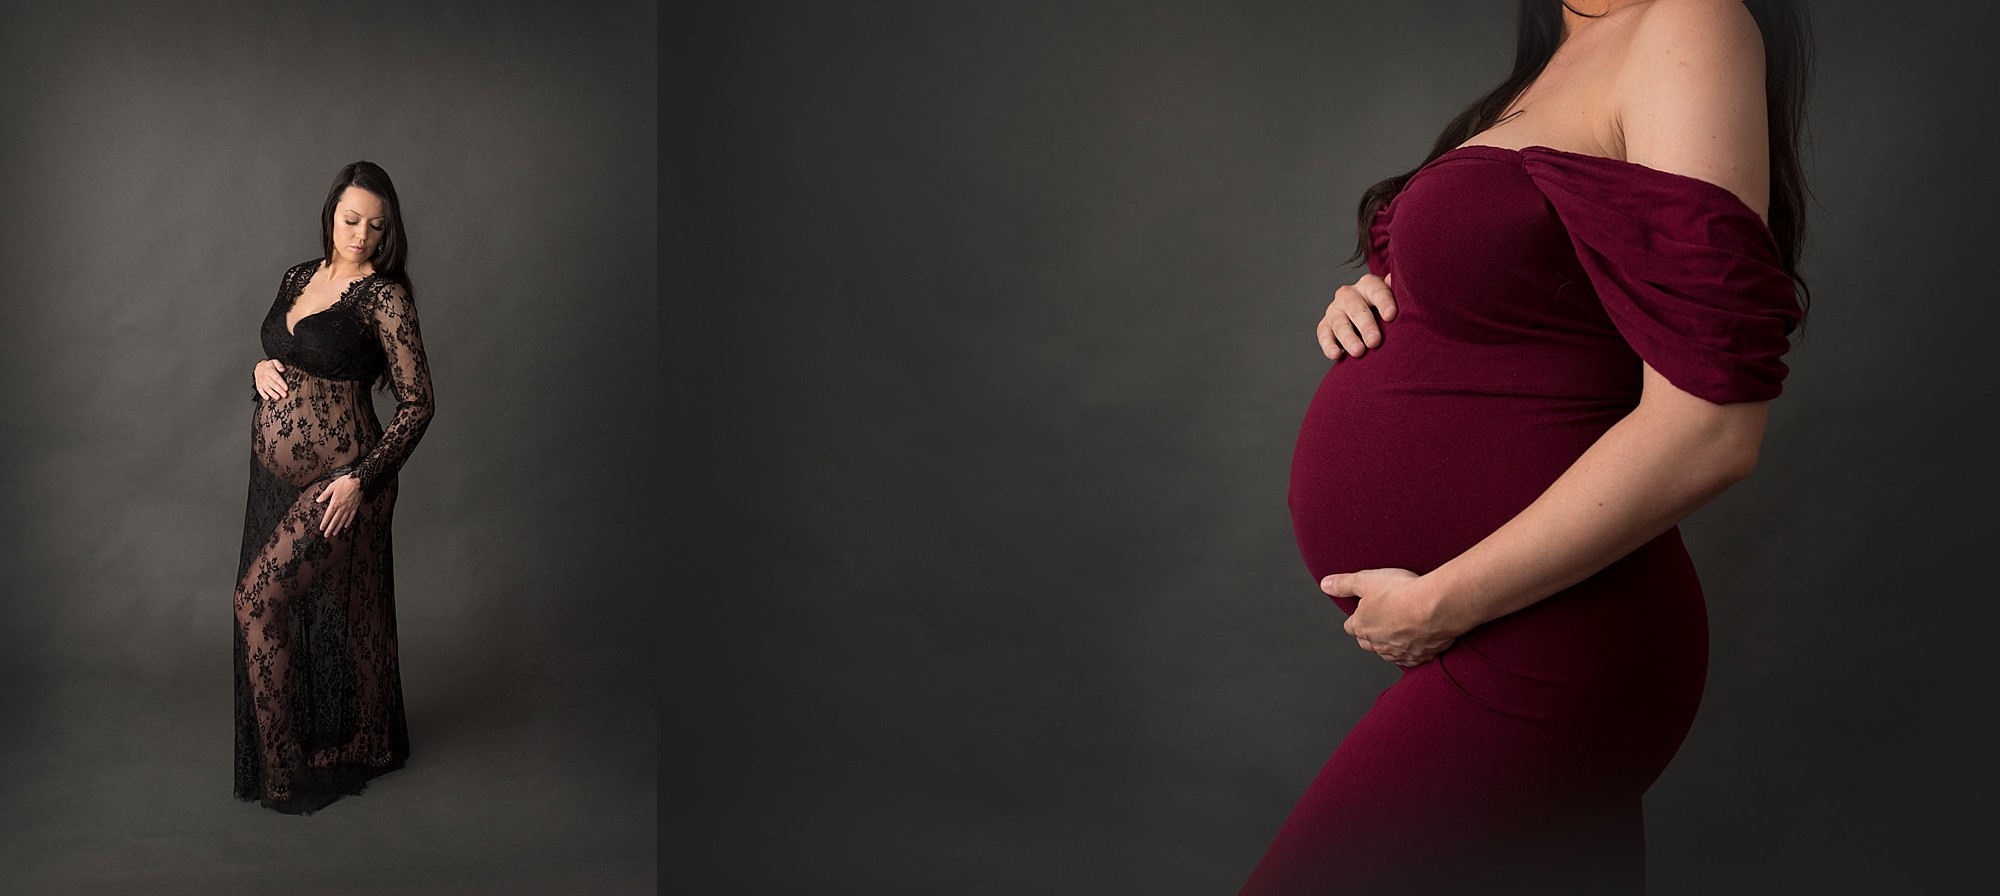 pregnant woman wearing two dresses and posing for her pictures